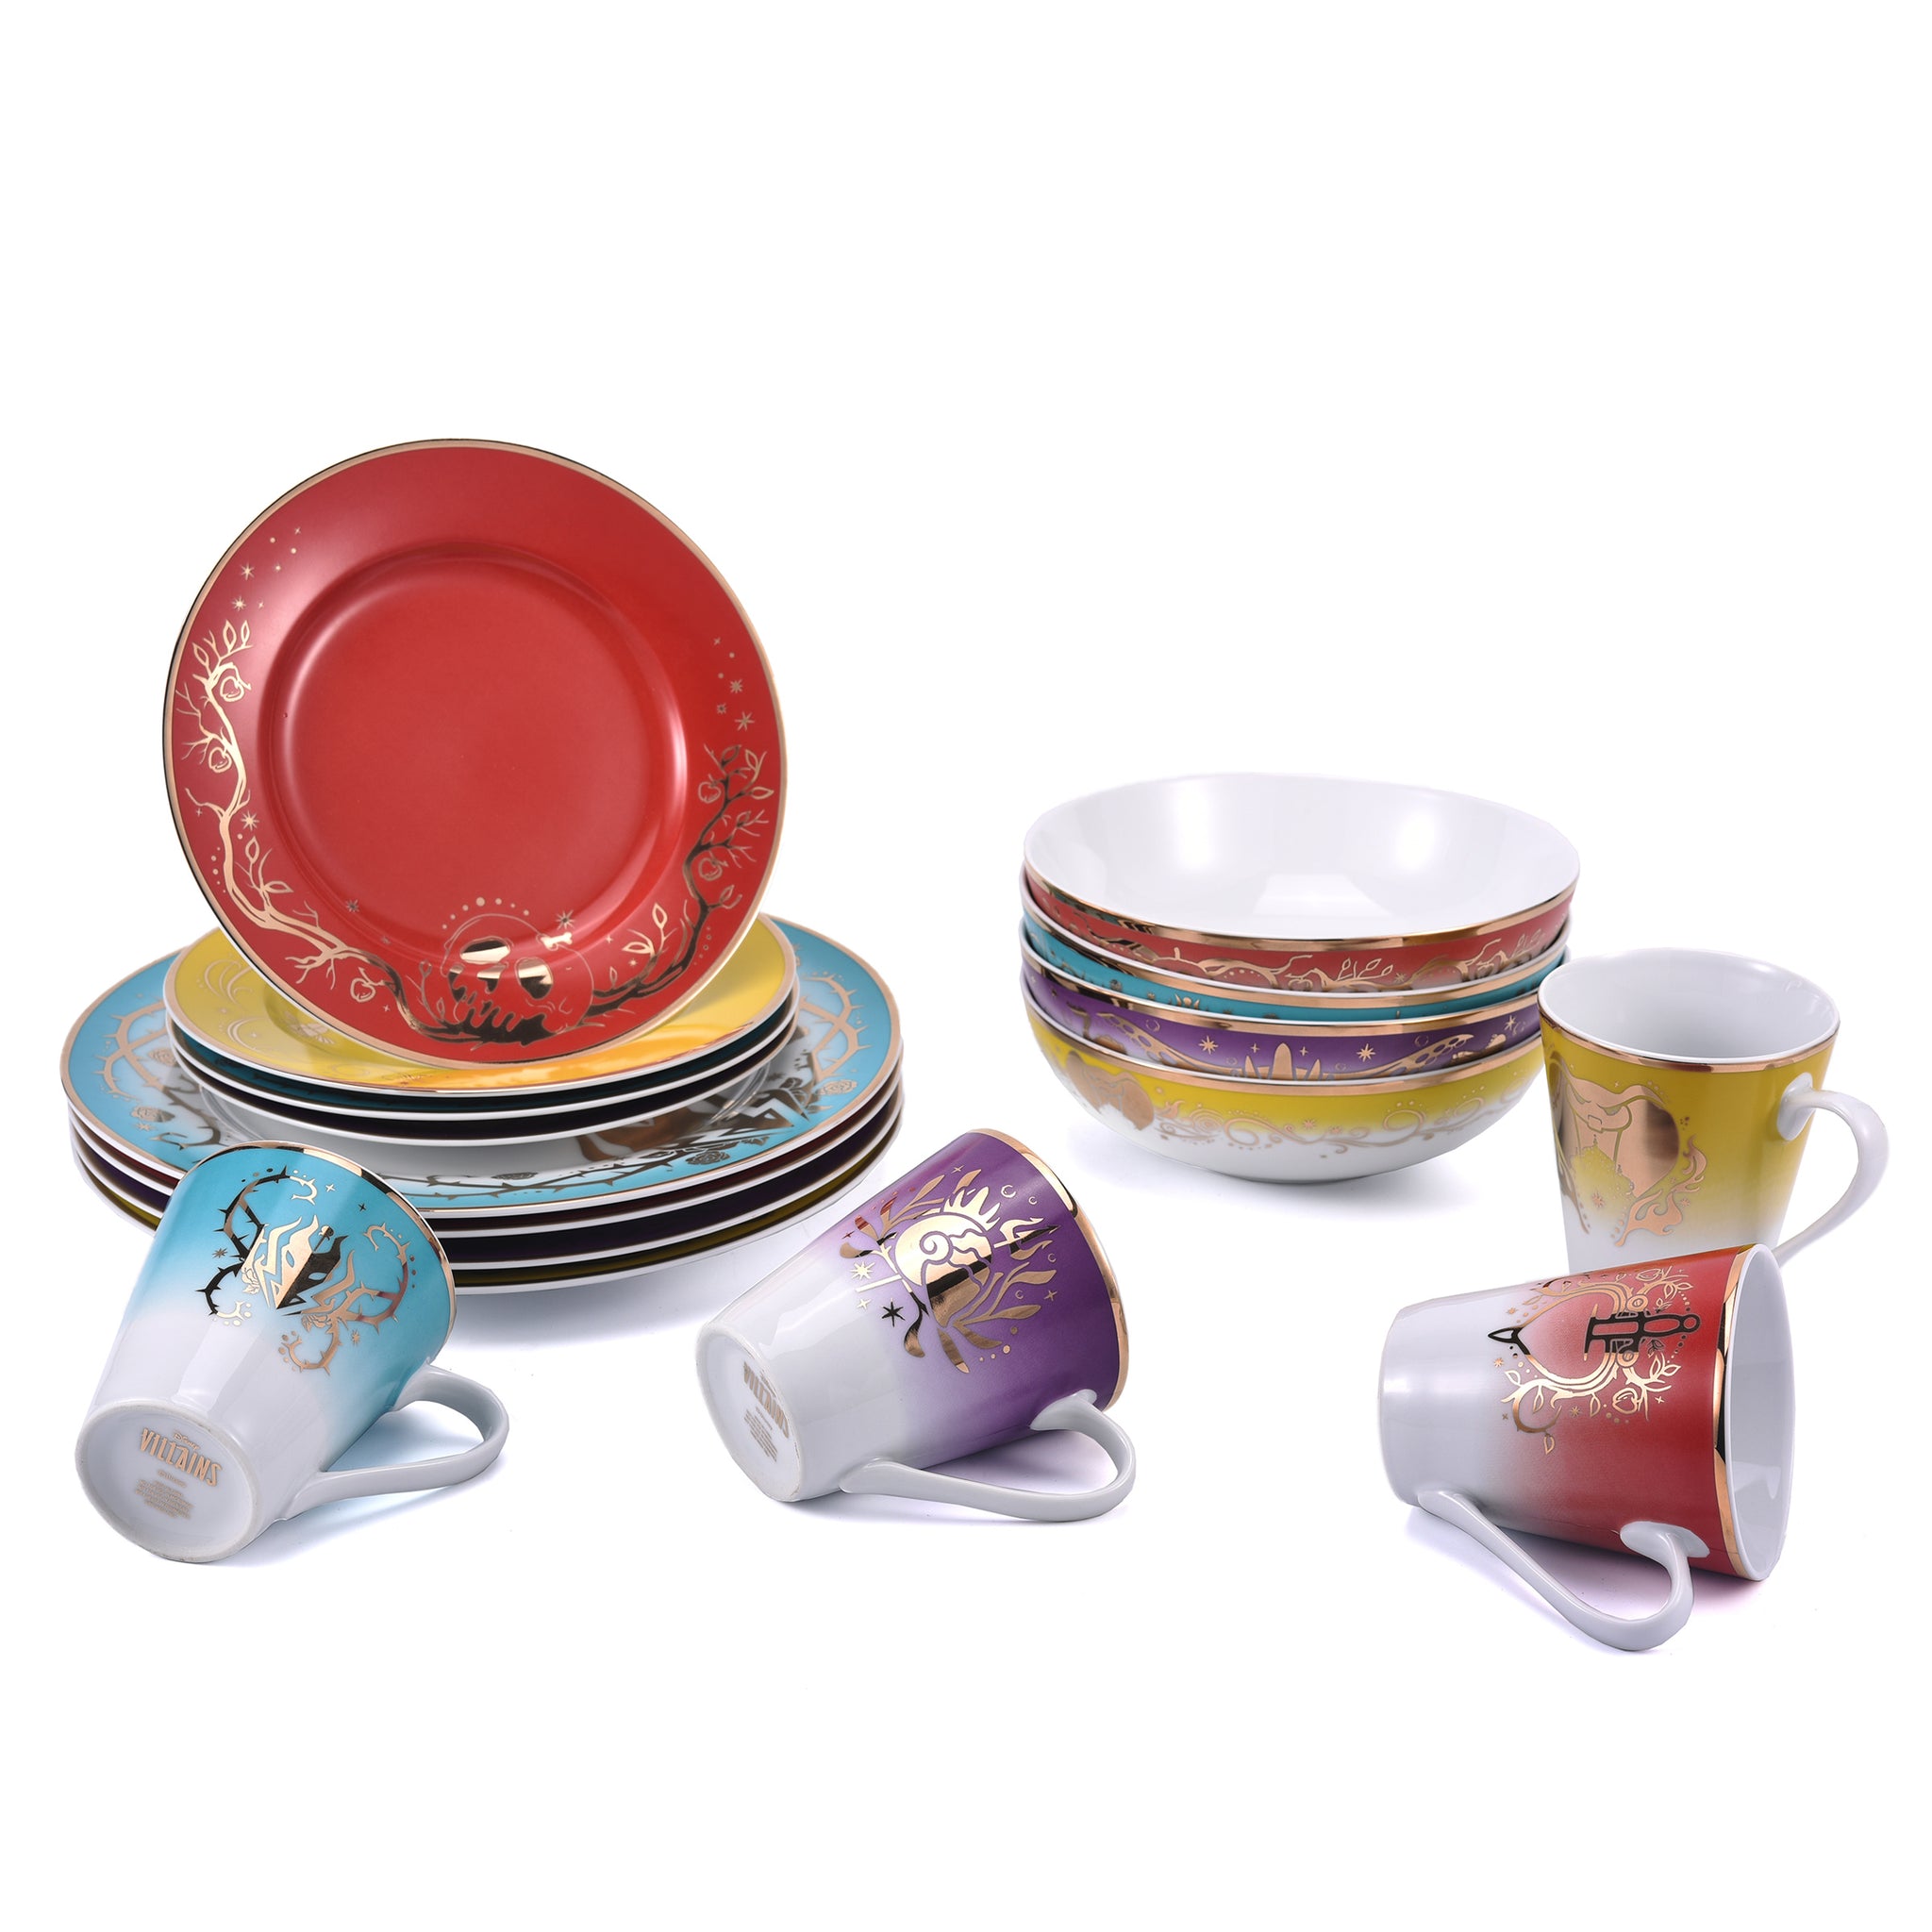 Disney Released More Kitchen Items Including Plates And Cups